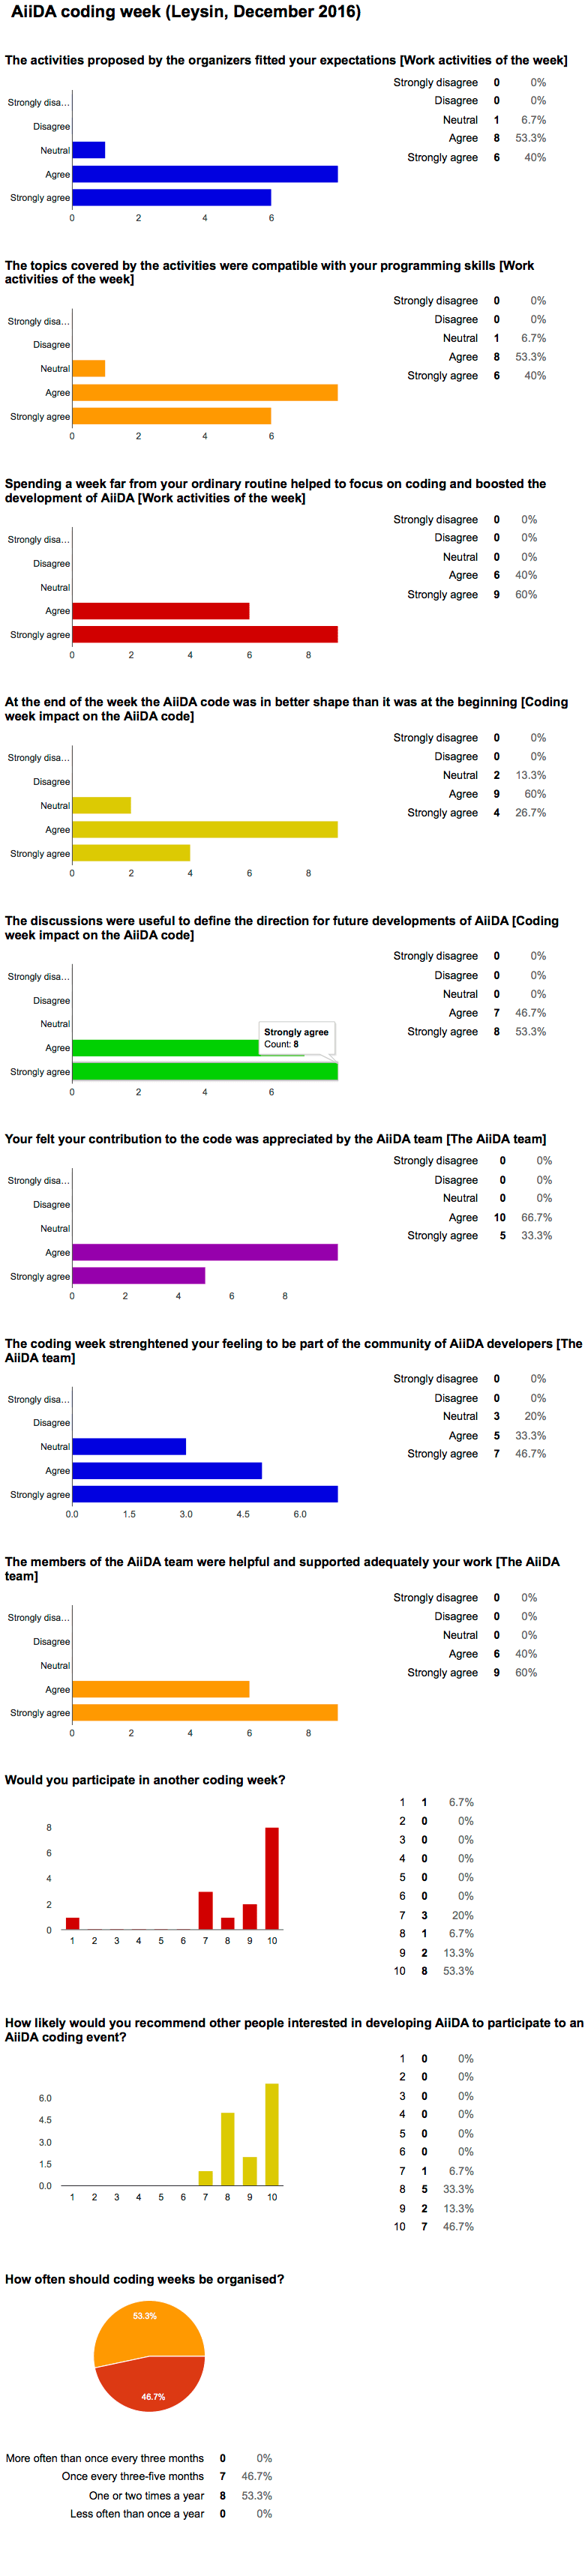 Results of the feedback form for the AiiDA Coding week (Dec 2016)